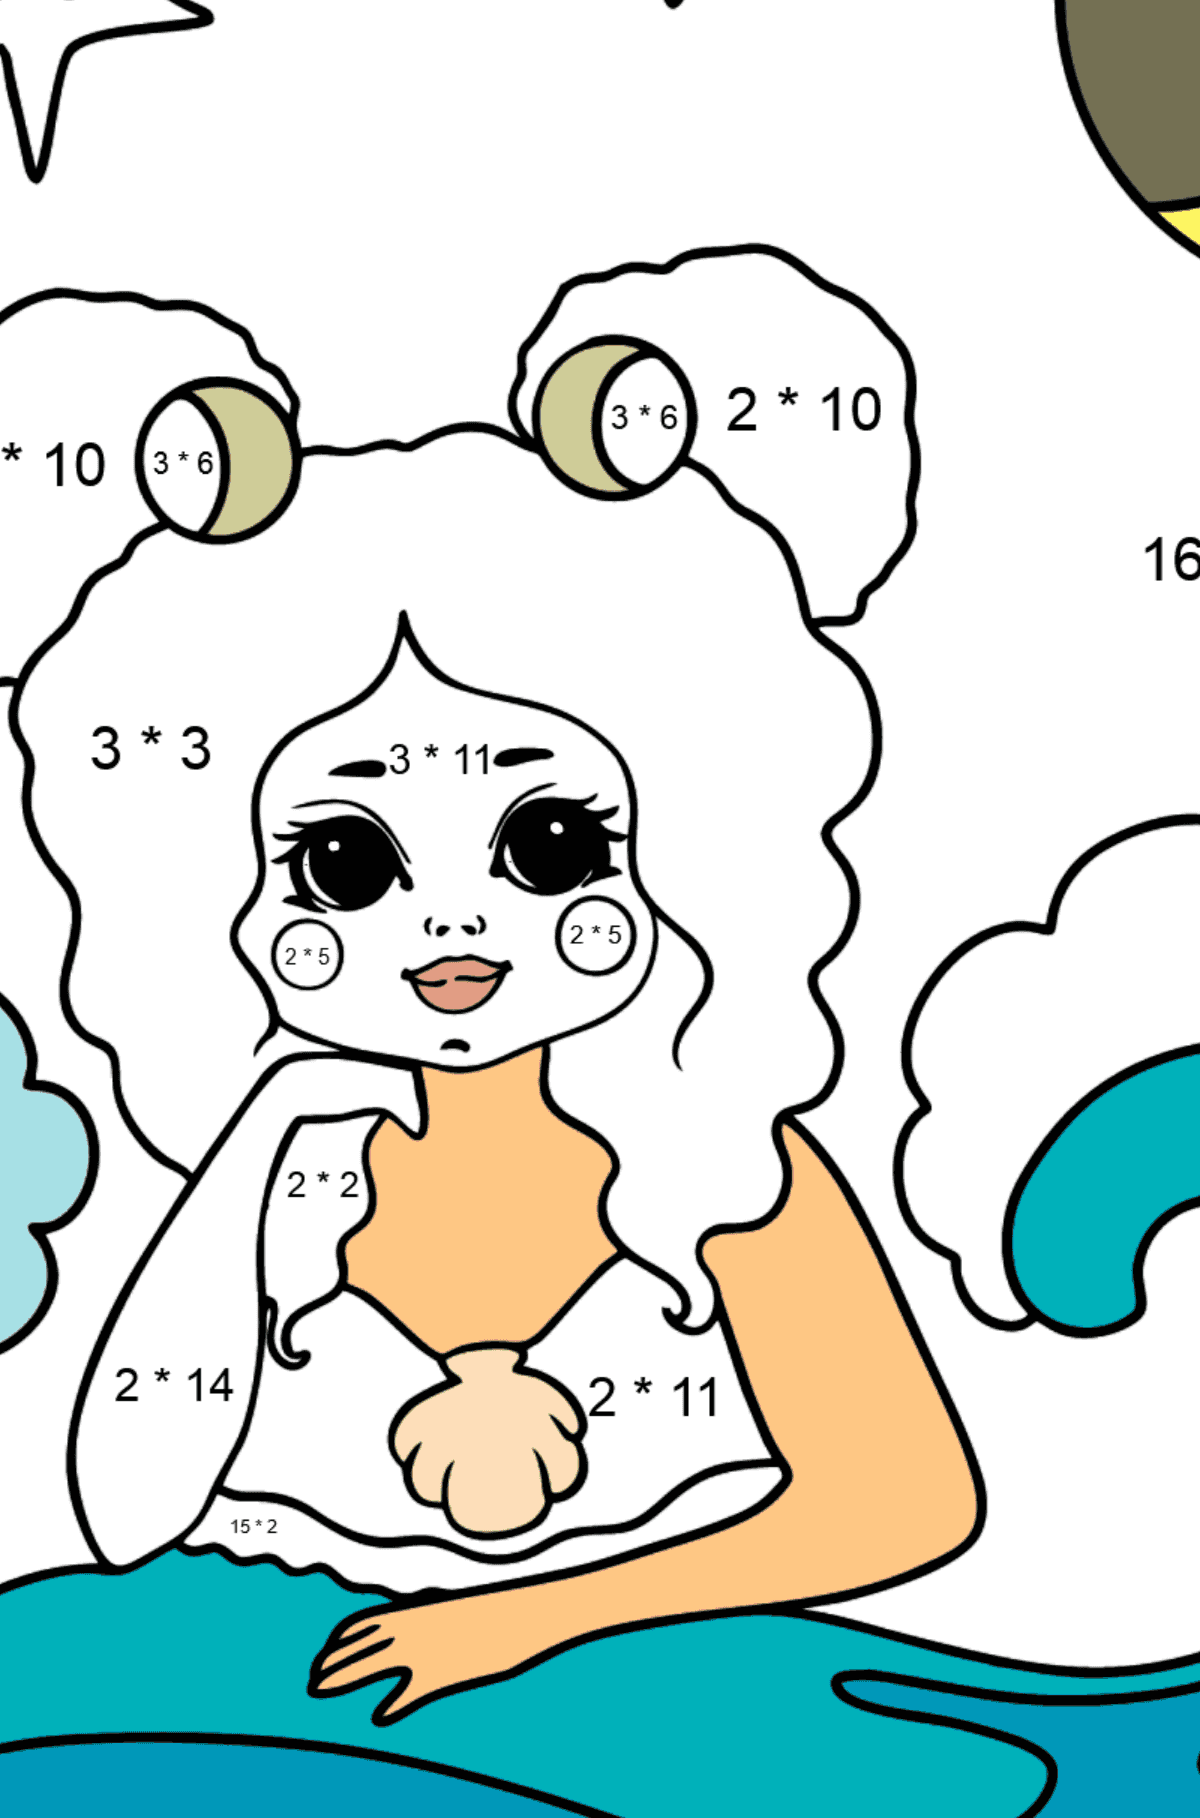 Mermaid and Moon coloring page - Math Coloring - Multiplication for Kids